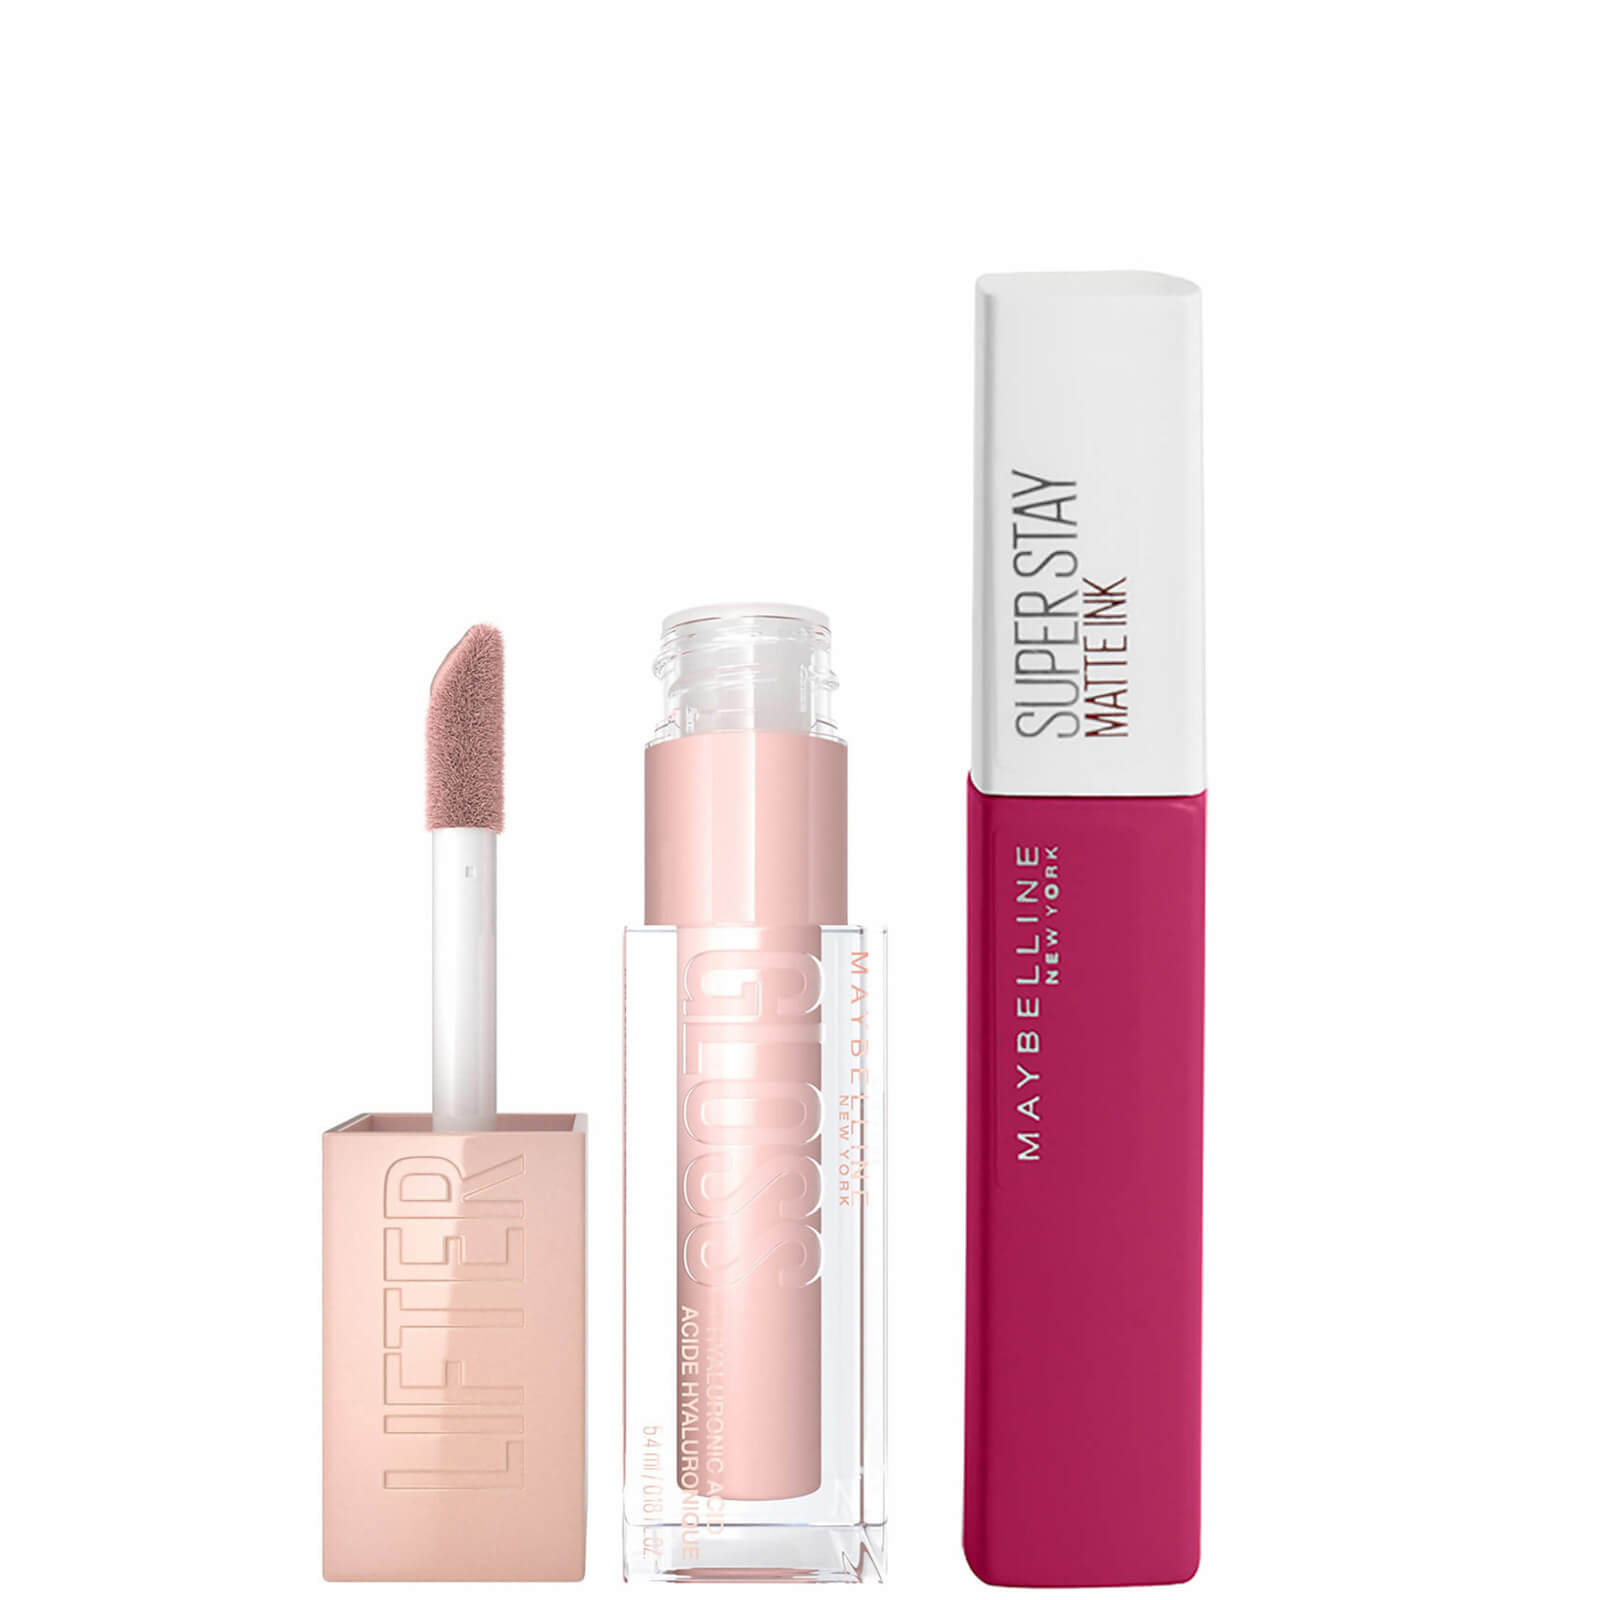 Maybelline Lifter Gloss and Superstay Matte Ink Lipstick Bundle (Various Shades) - 120 Artist